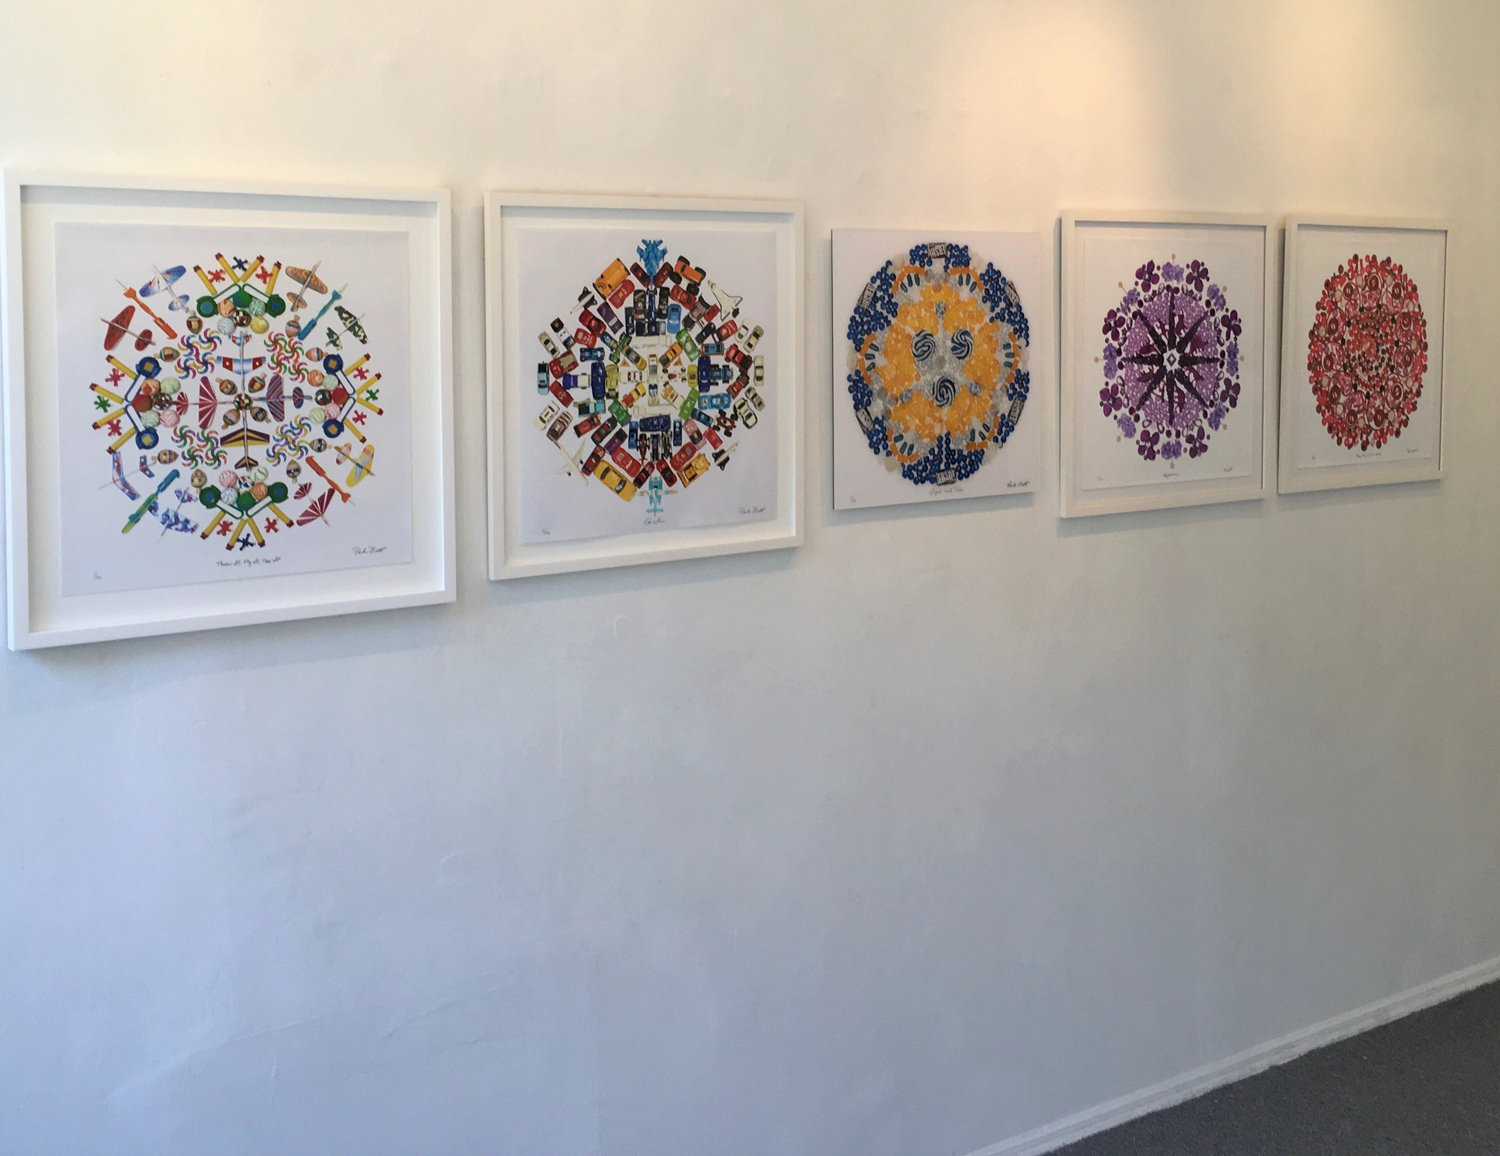 The group exhibition ‘Picture This’ at Elisa Contemporary Art brings together works by various artists, including Paula Brett’s mandalas.